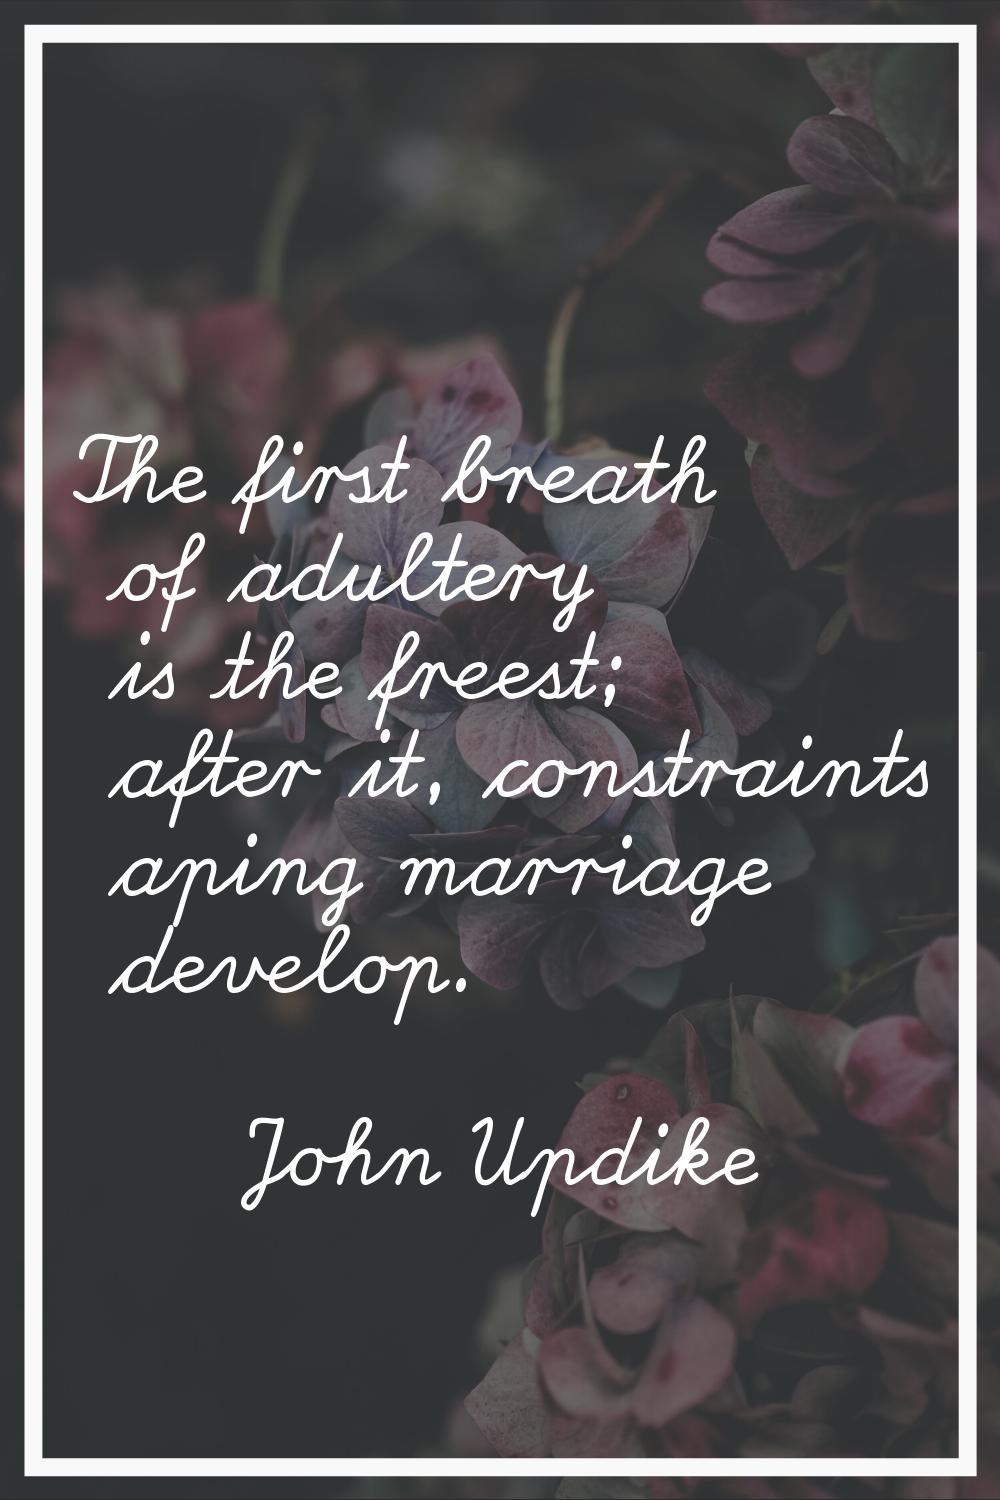 The first breath of adultery is the freest; after it, constraints aping marriage develop.